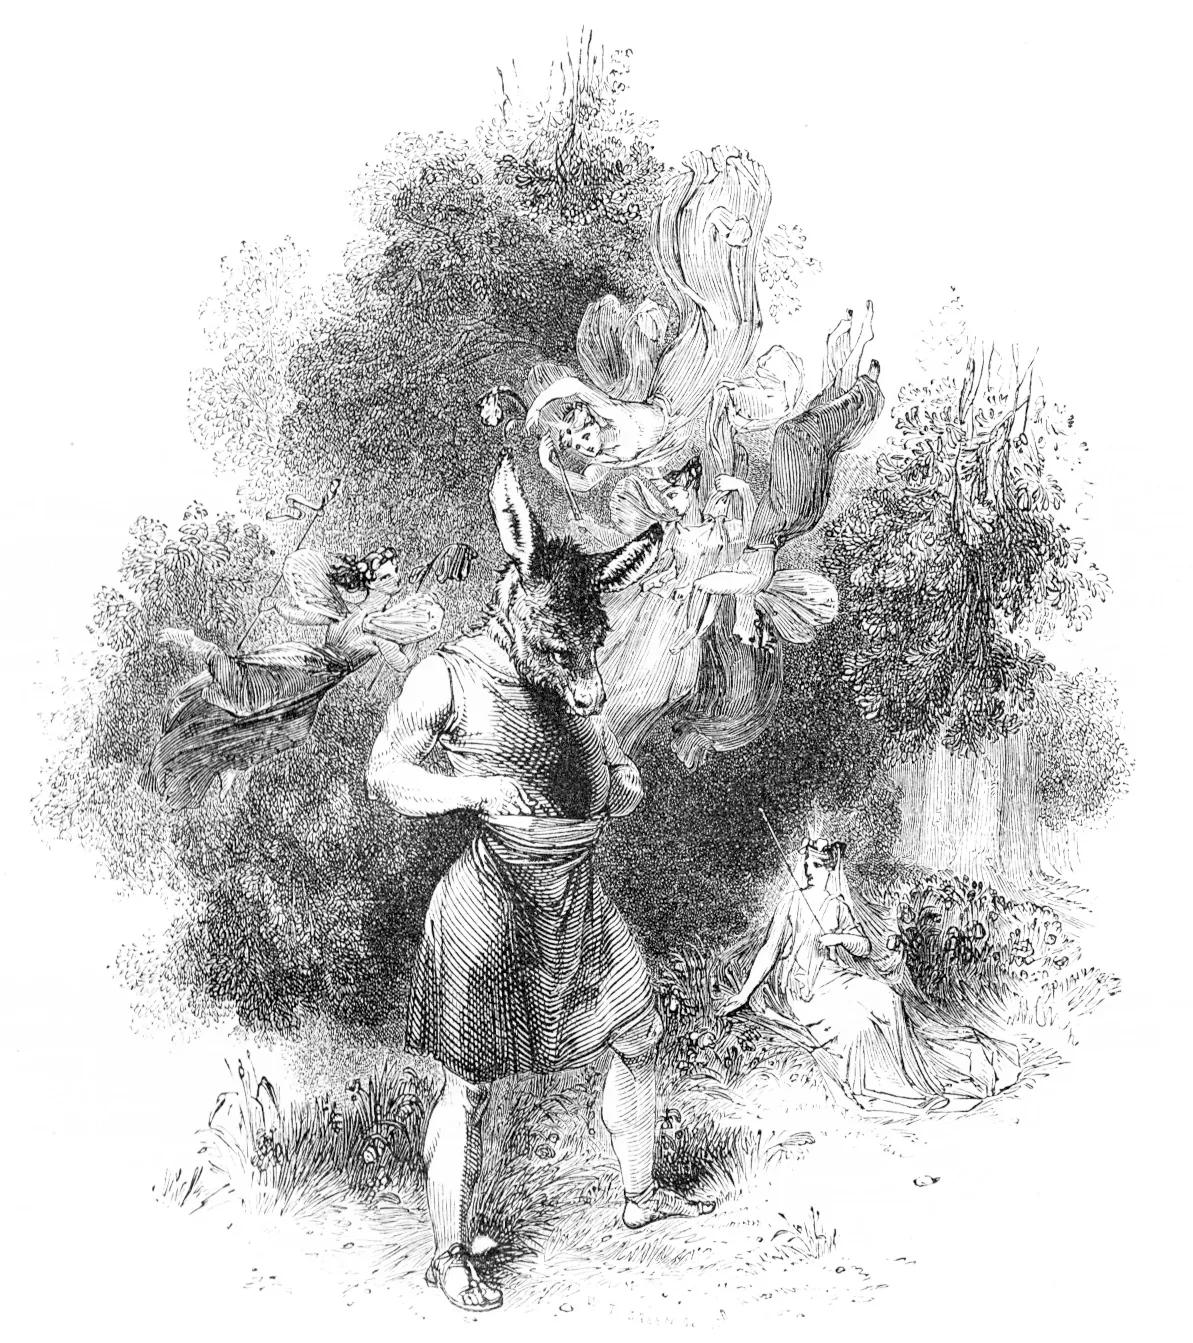 A man with a donkey's head, with faeries around him.